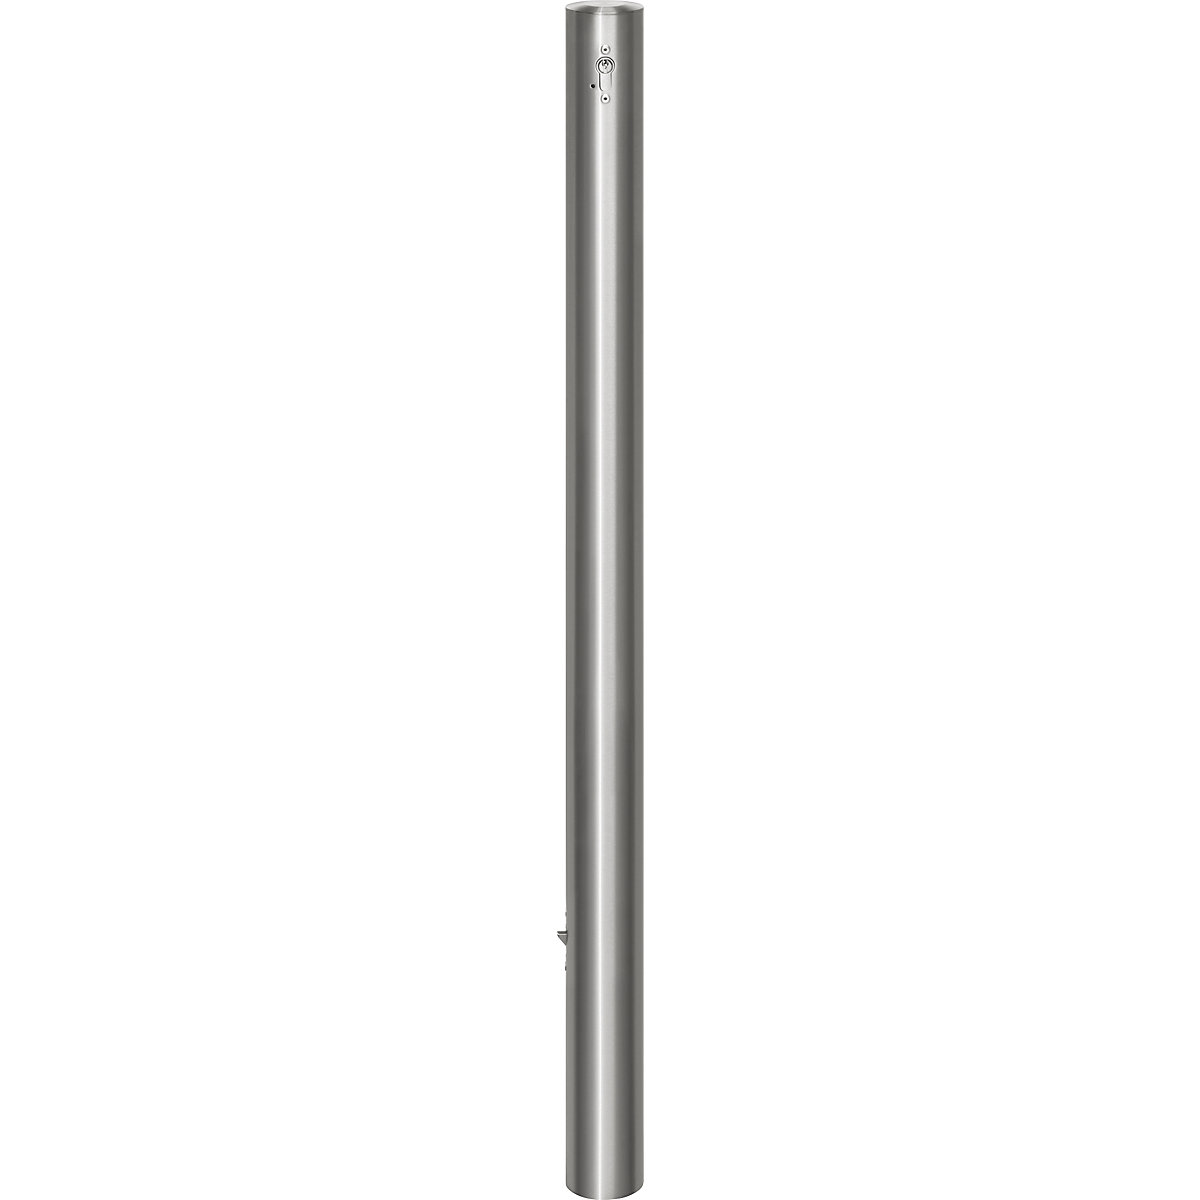 Stainless steel barrier post, with flat head, ground sleeve for concreting in, Ø 76 mm, profile cylinder-6